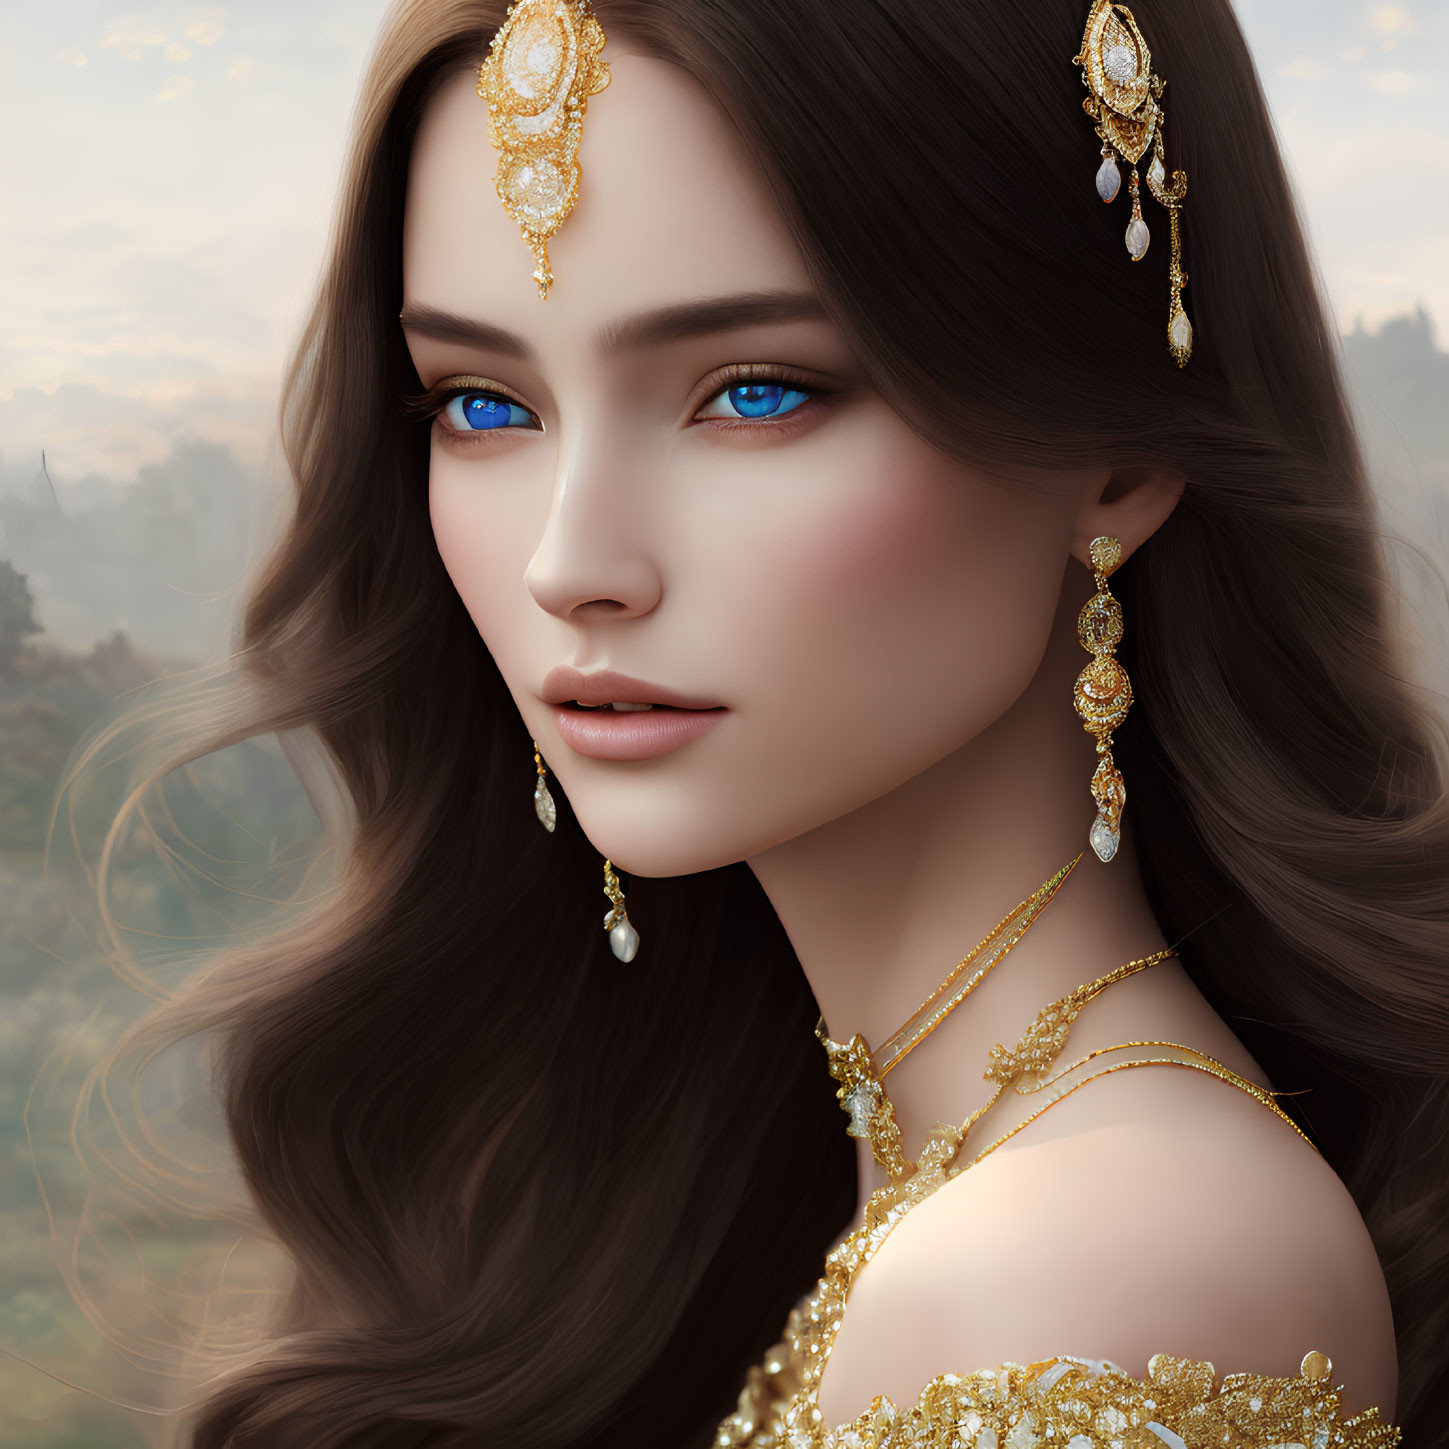 Digital portrait of woman with deep blue eyes and gold jewelry against soft background